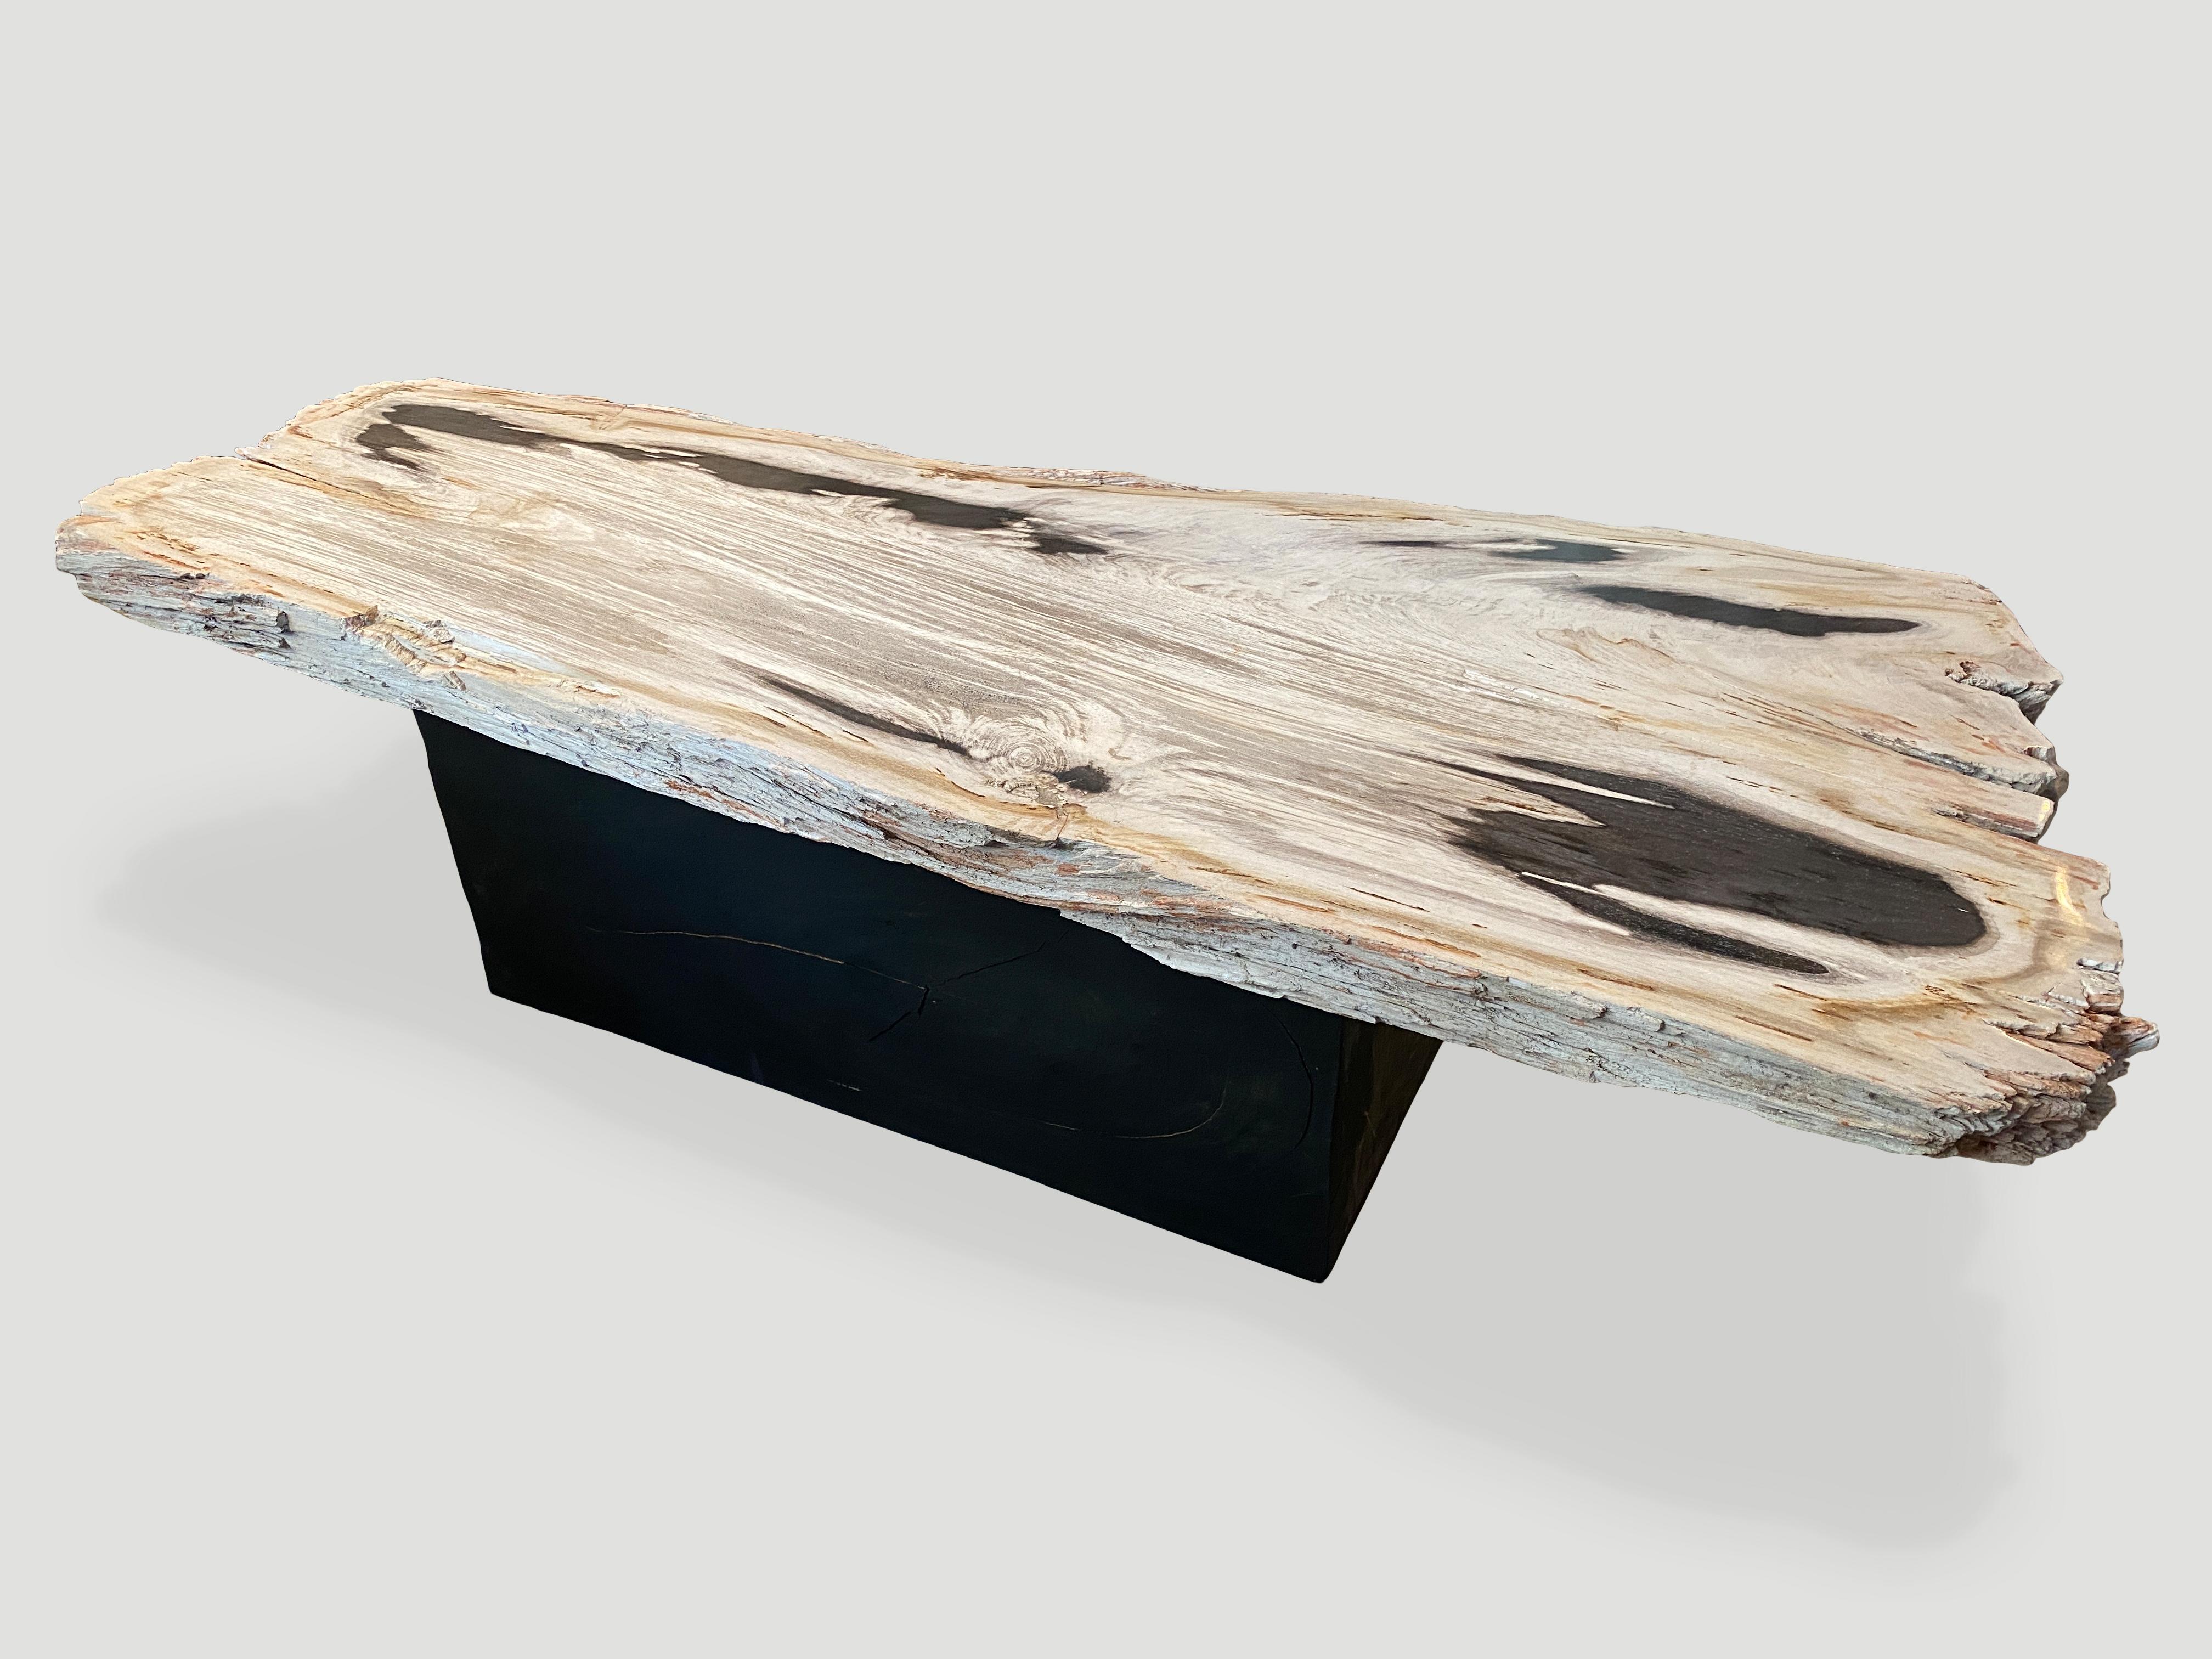 Impressive 2.5” single slab coffee table resting on a solid wood base. We can switch out the base for a console height. Please inquire. Bold contrasting black and white tones. It’s fascinating how Mother Nature produces these stunning 40 million